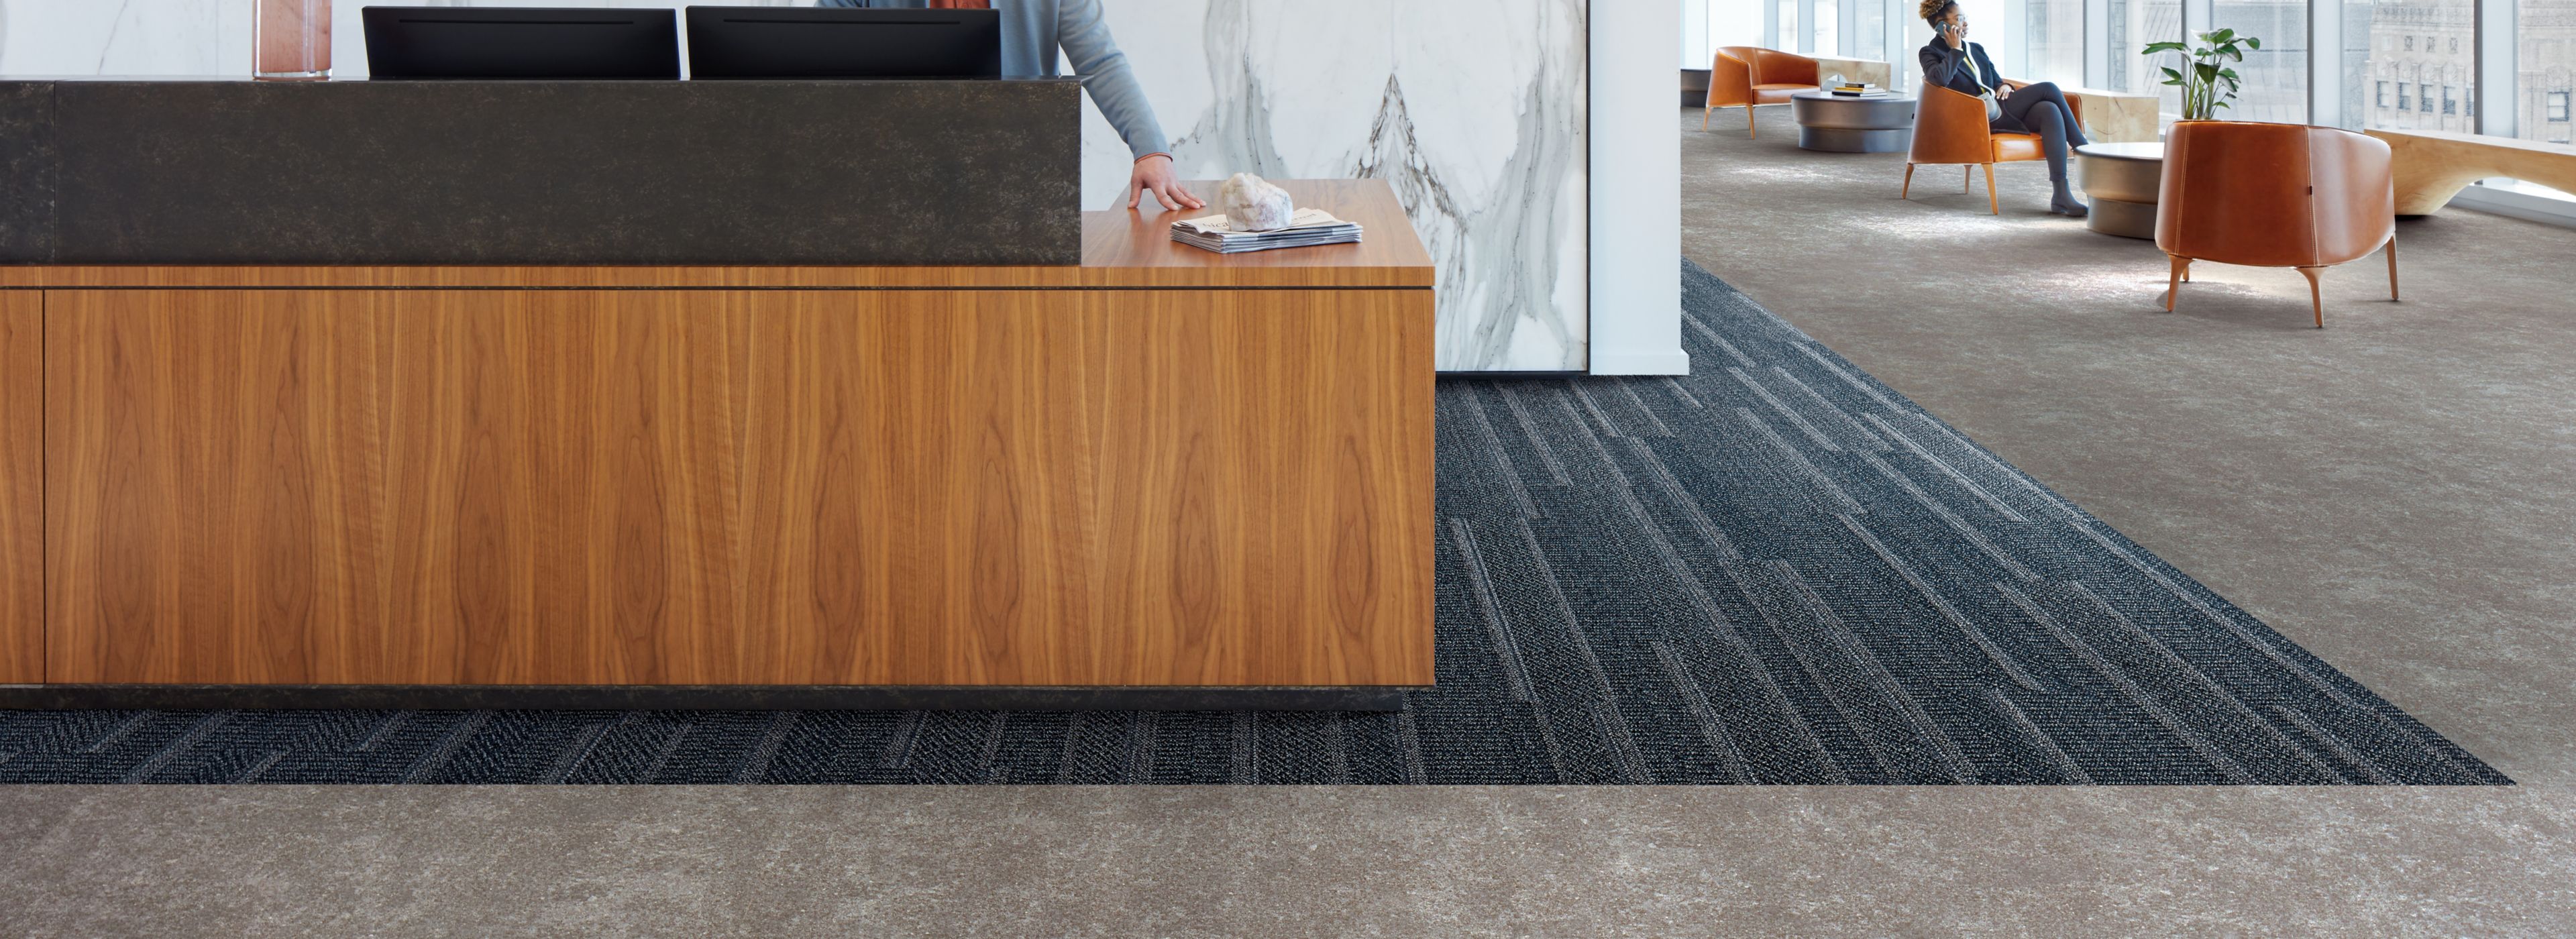 image Interface Simple Sash plank carpet tile and Walk of Life LVT in a corporate lobby area with front desk  numéro 1